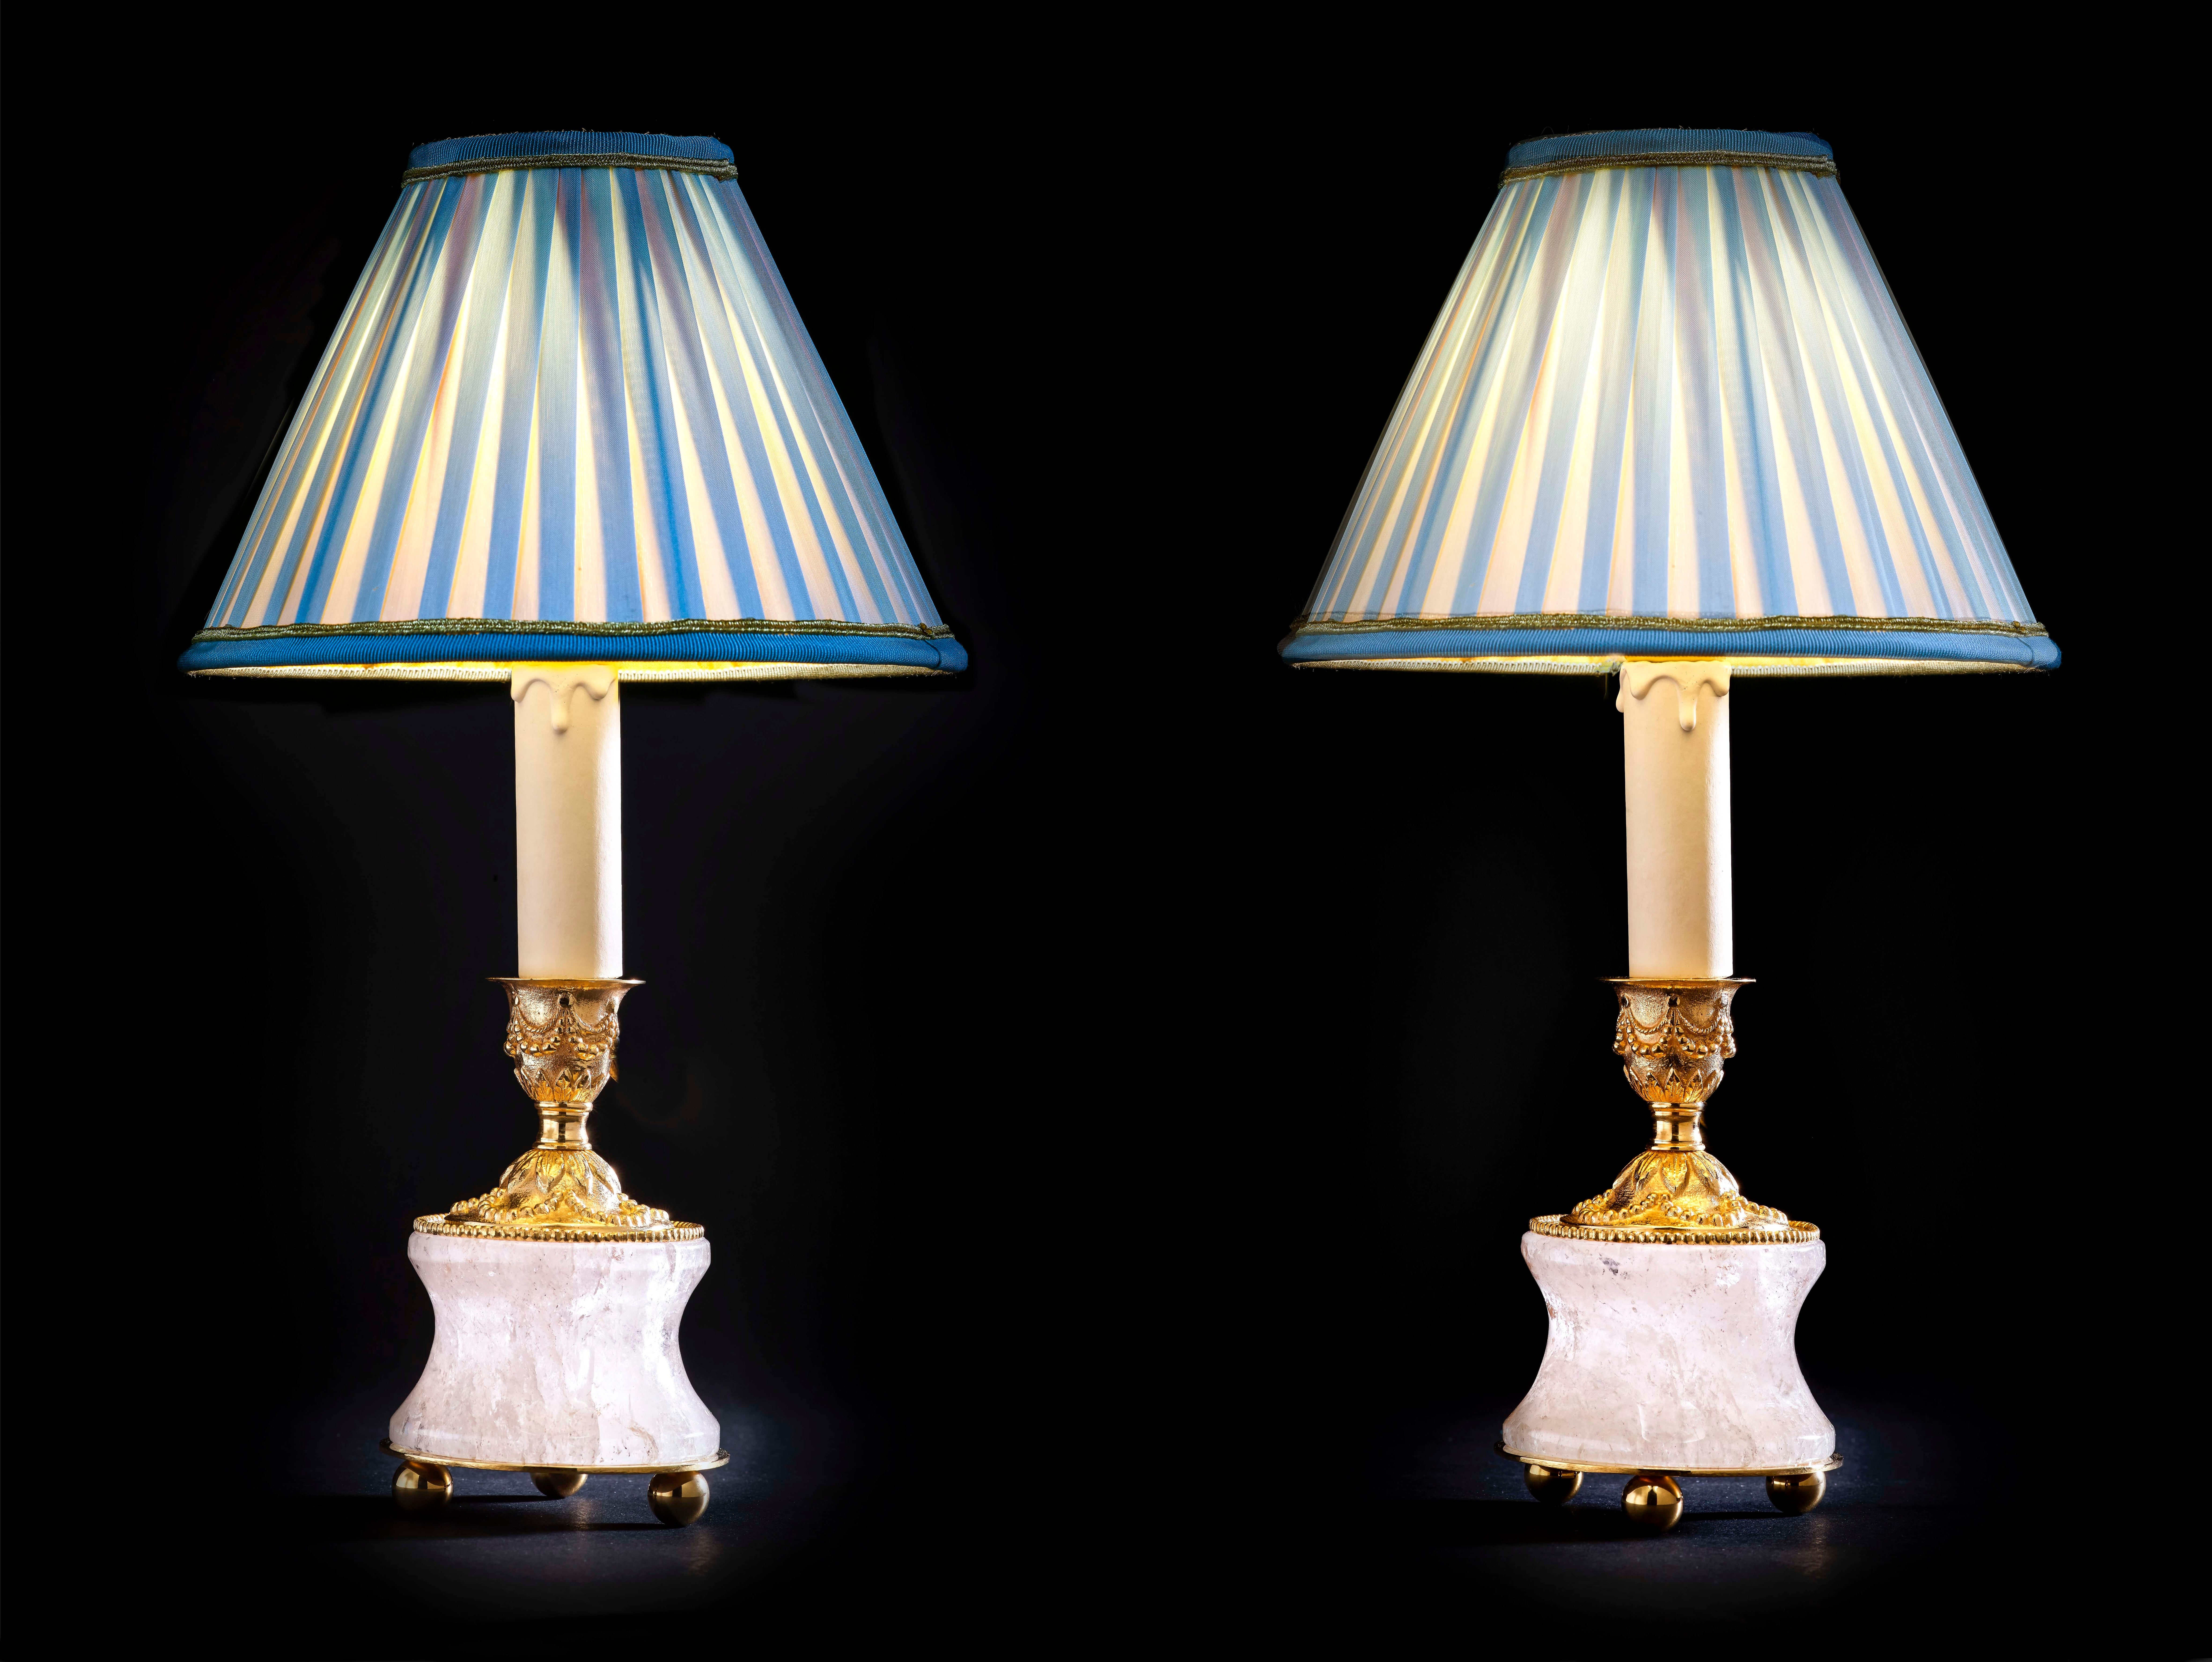 Rock crystal Louis the XVIth style 24-karat ormolu gilding bronze light blue lampshades made by Alexandre Vossion.
This model can be also used as candlesticks to make your dining table so chic.
Model I of four different models.
Handmade in